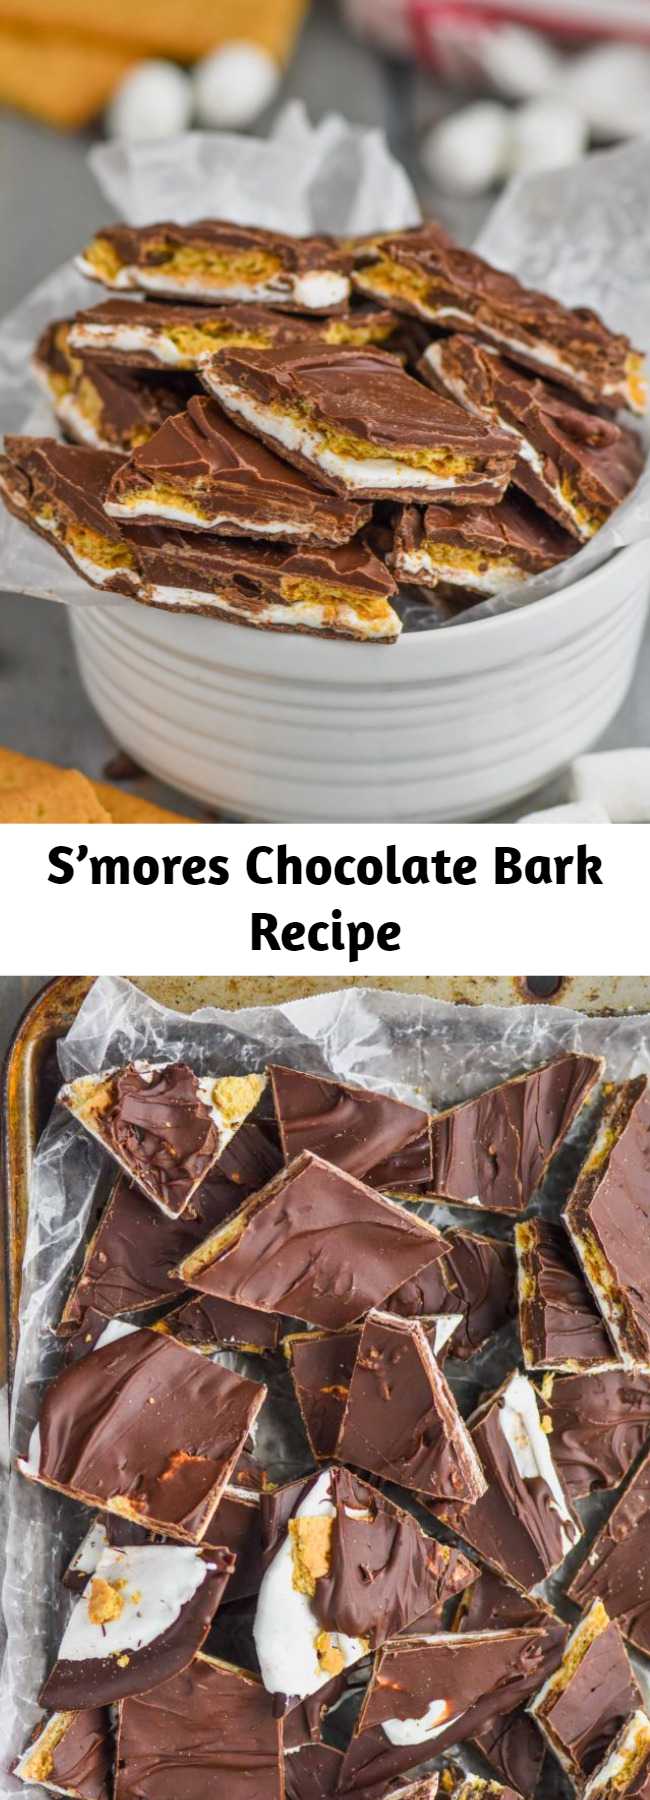 S'mores Chocolate Bark is a yummy, amazing inside out s'mores that you don't even need a camp fire for!  Chocolate Bark is my favorite thing to make because it is so easy and the possibilities are endless!